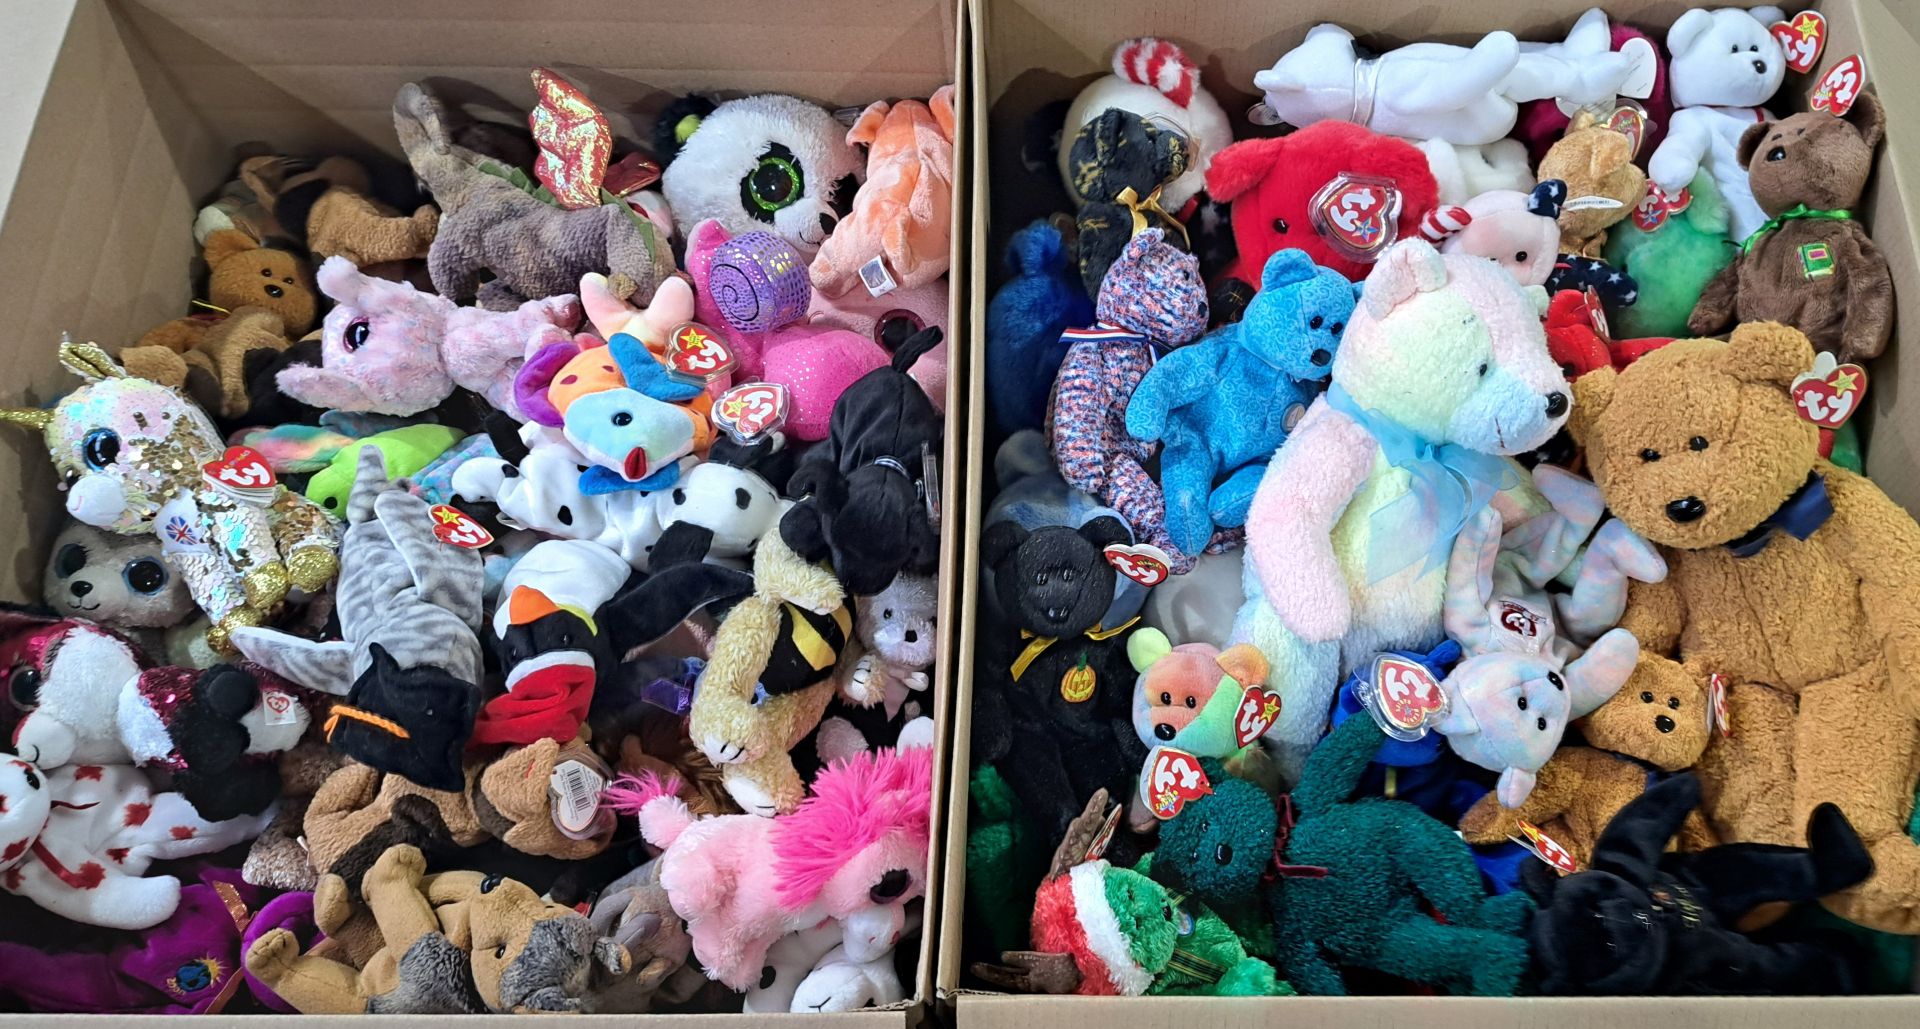 Large assortment of TY Beanie Babies/Beanie Boos